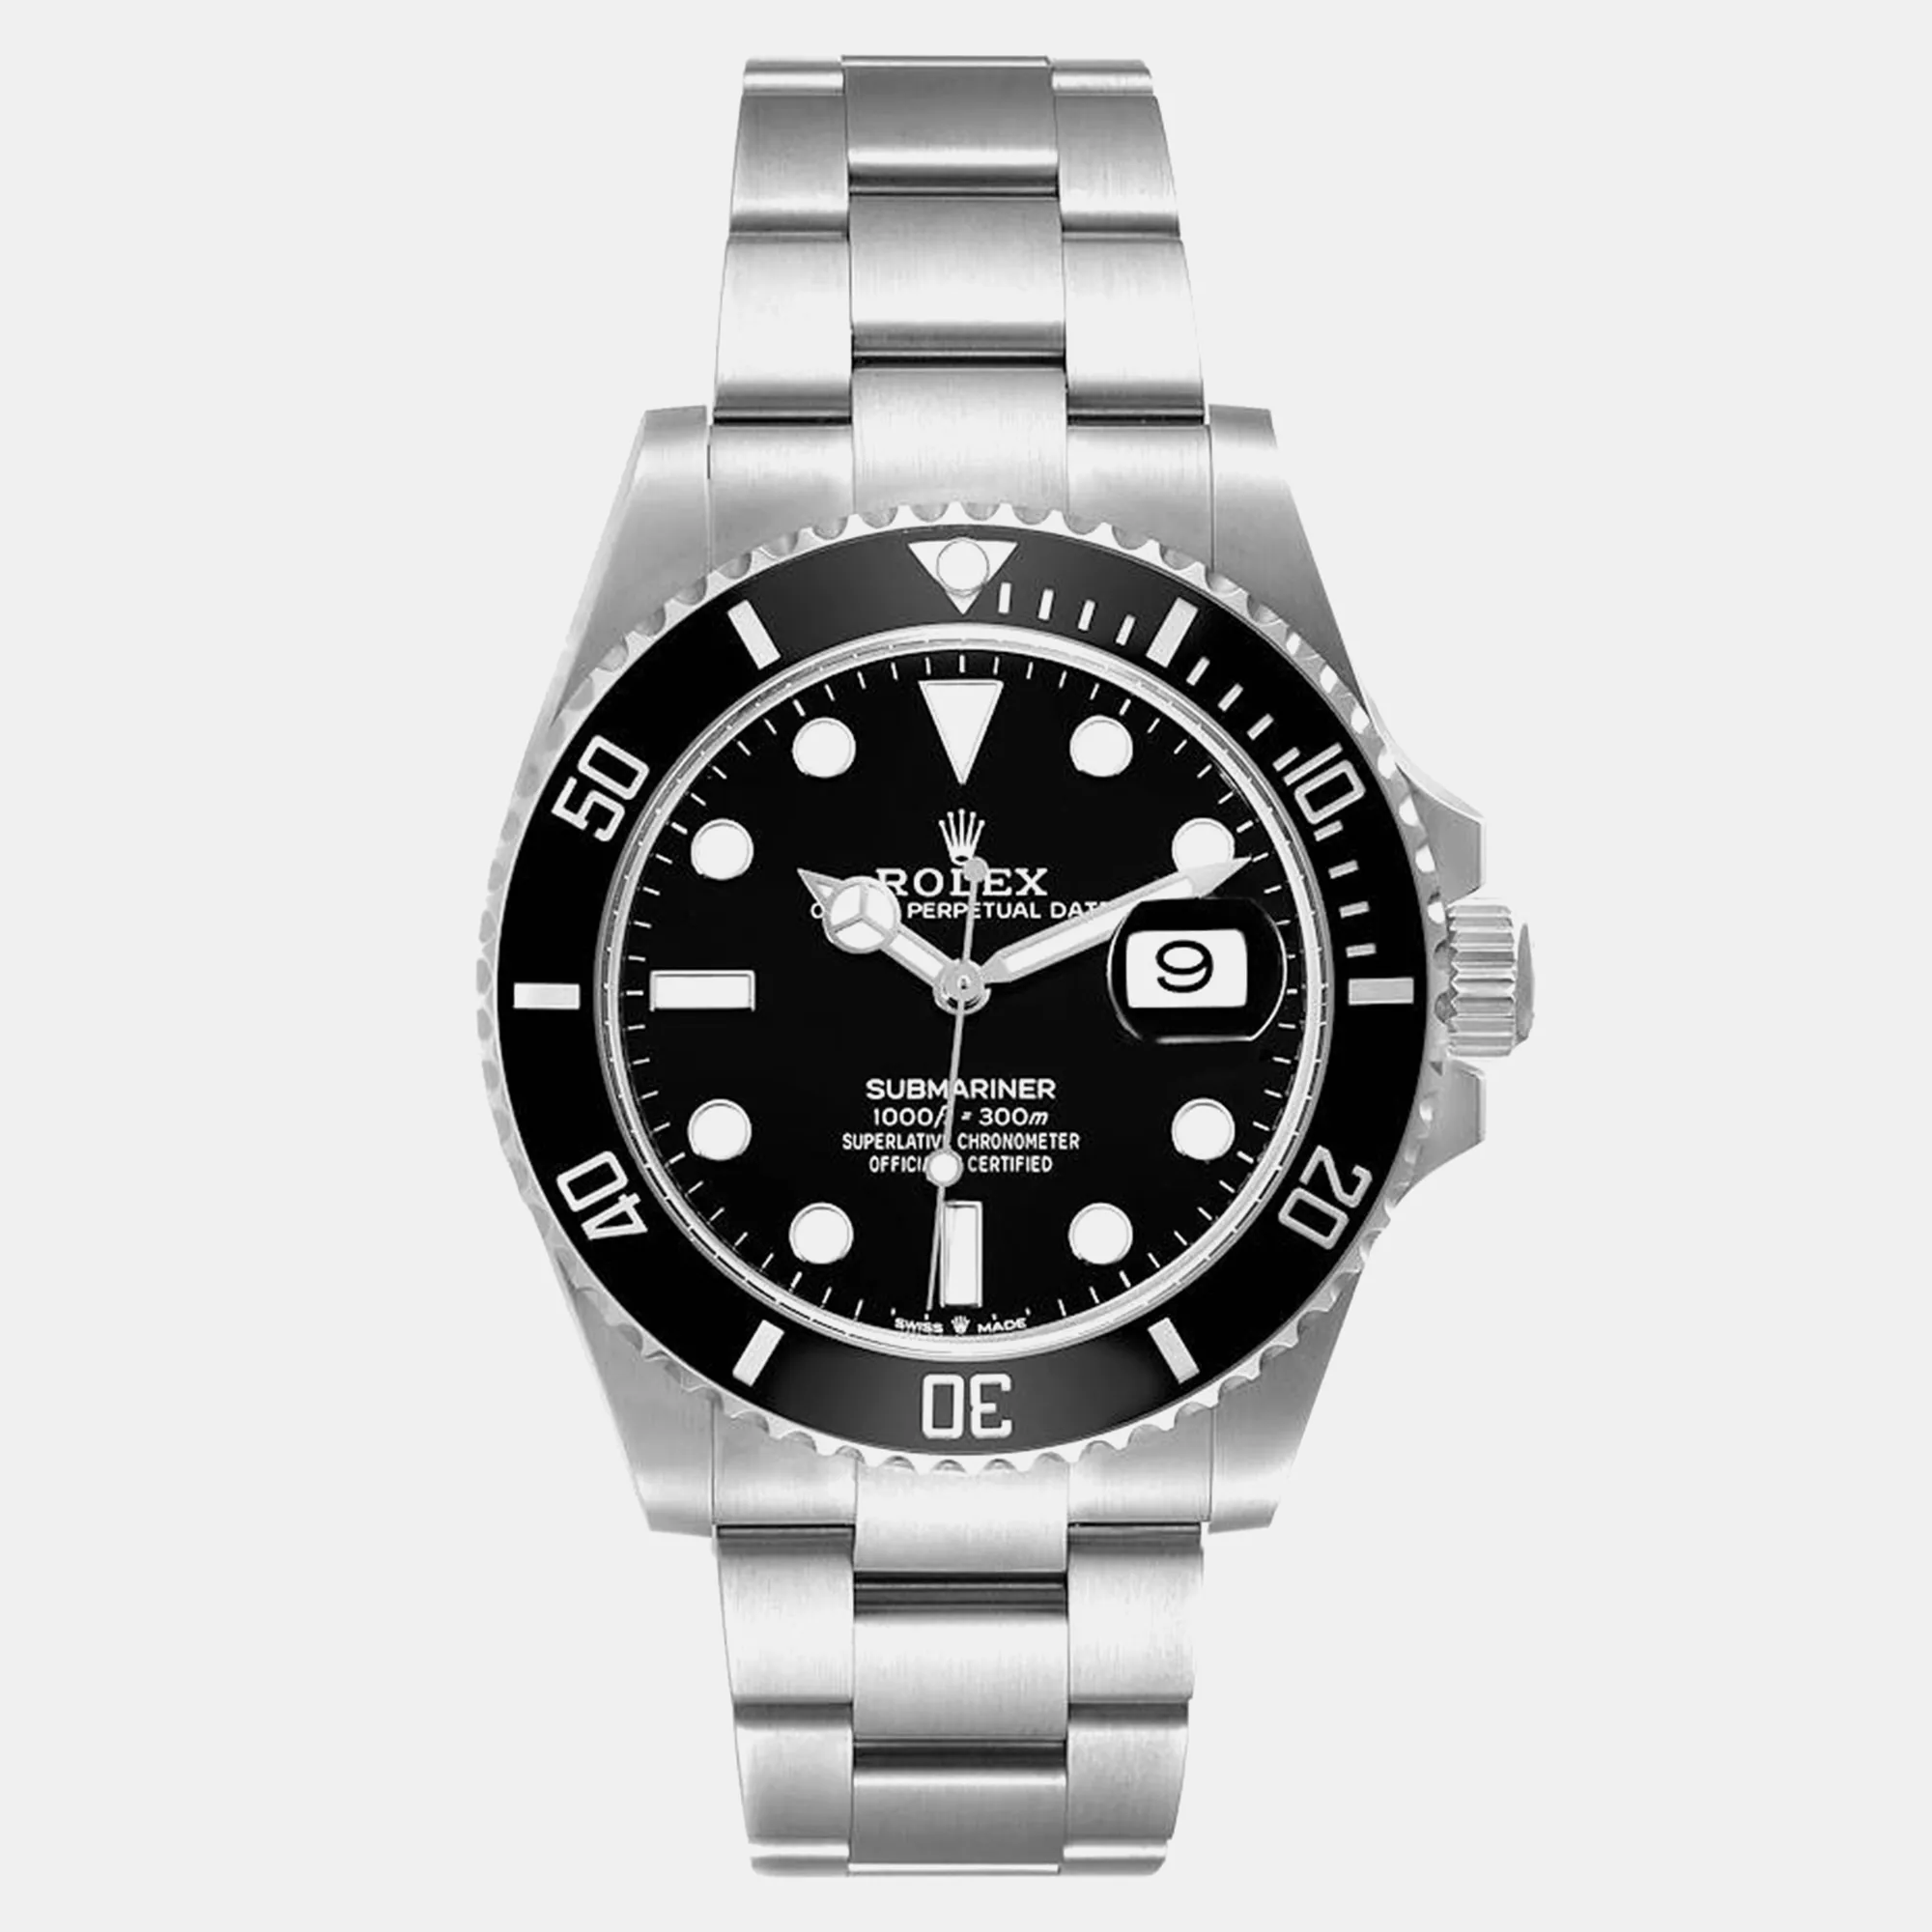 Rolex Submariner 41mm Stainless steel and ceramic